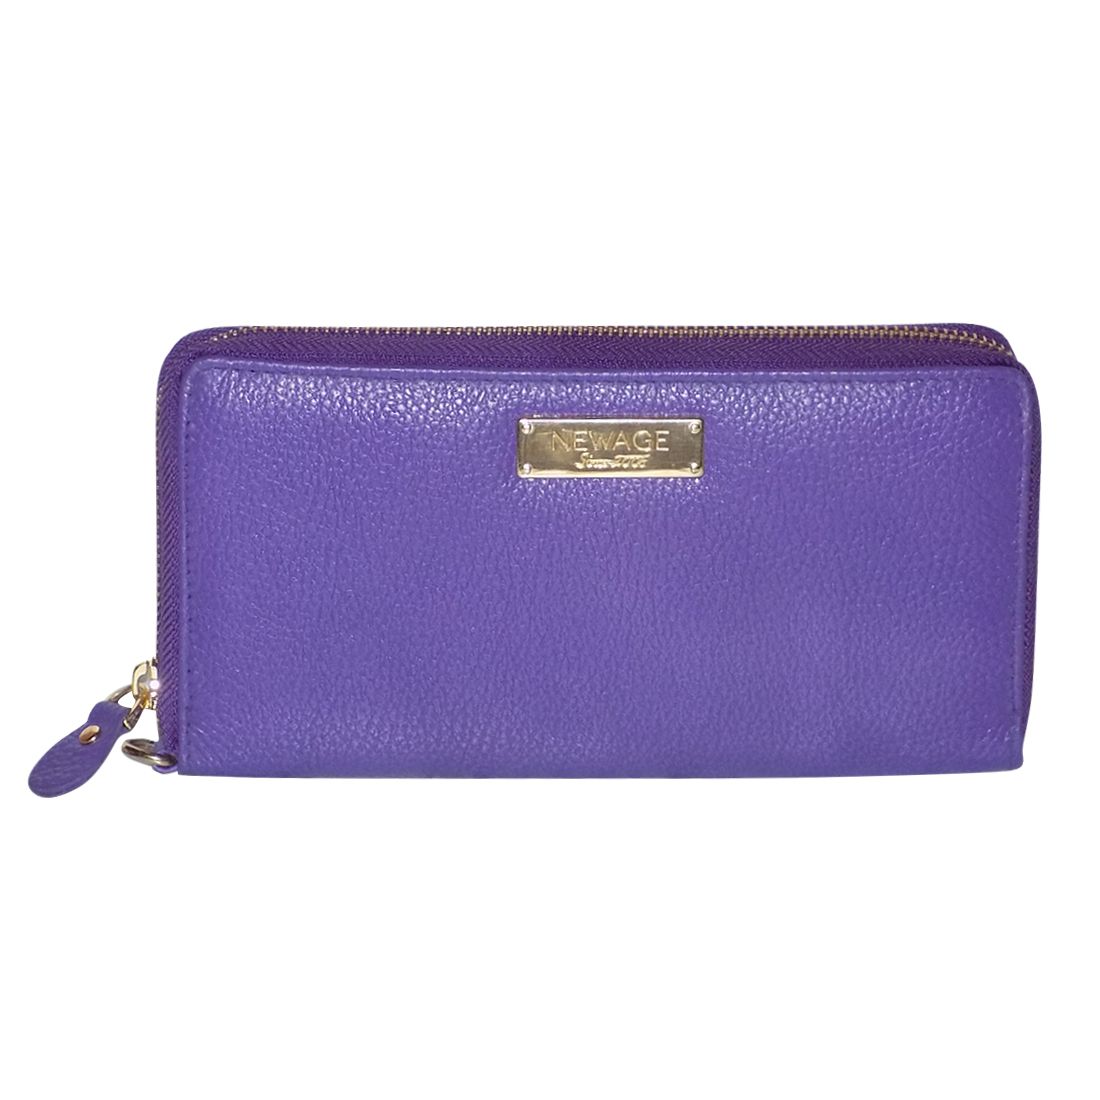 Buy Style 98 Purple Wallet at Best Prices in India - Snapdeal